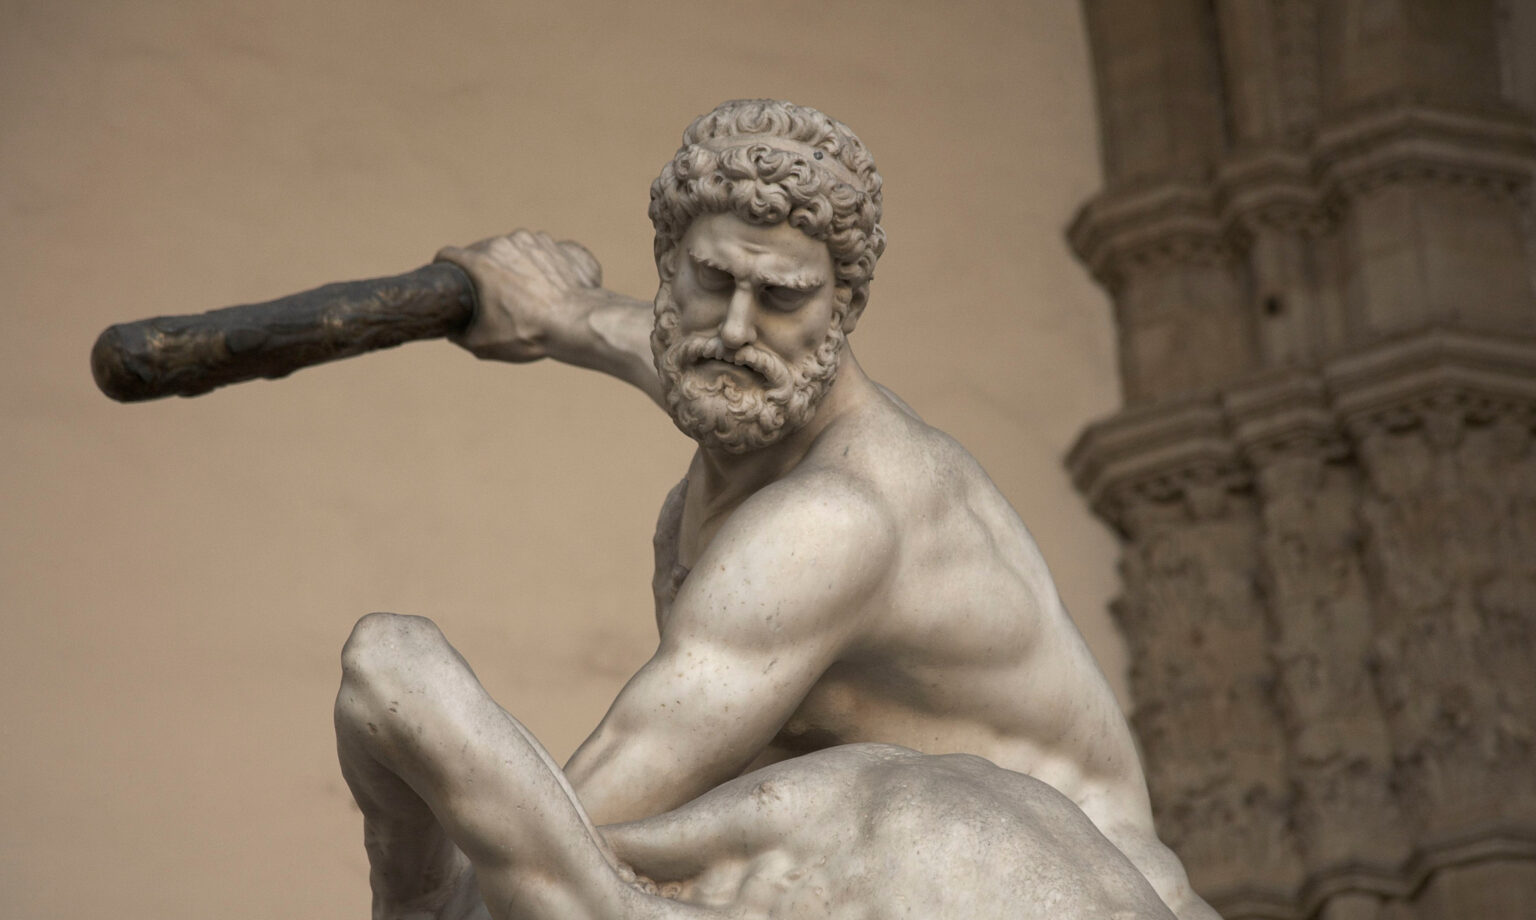 The Greek myth of Hercules lives on in tons of books, movies, and TV shows. Check out these films about one of the first superheroes in history.